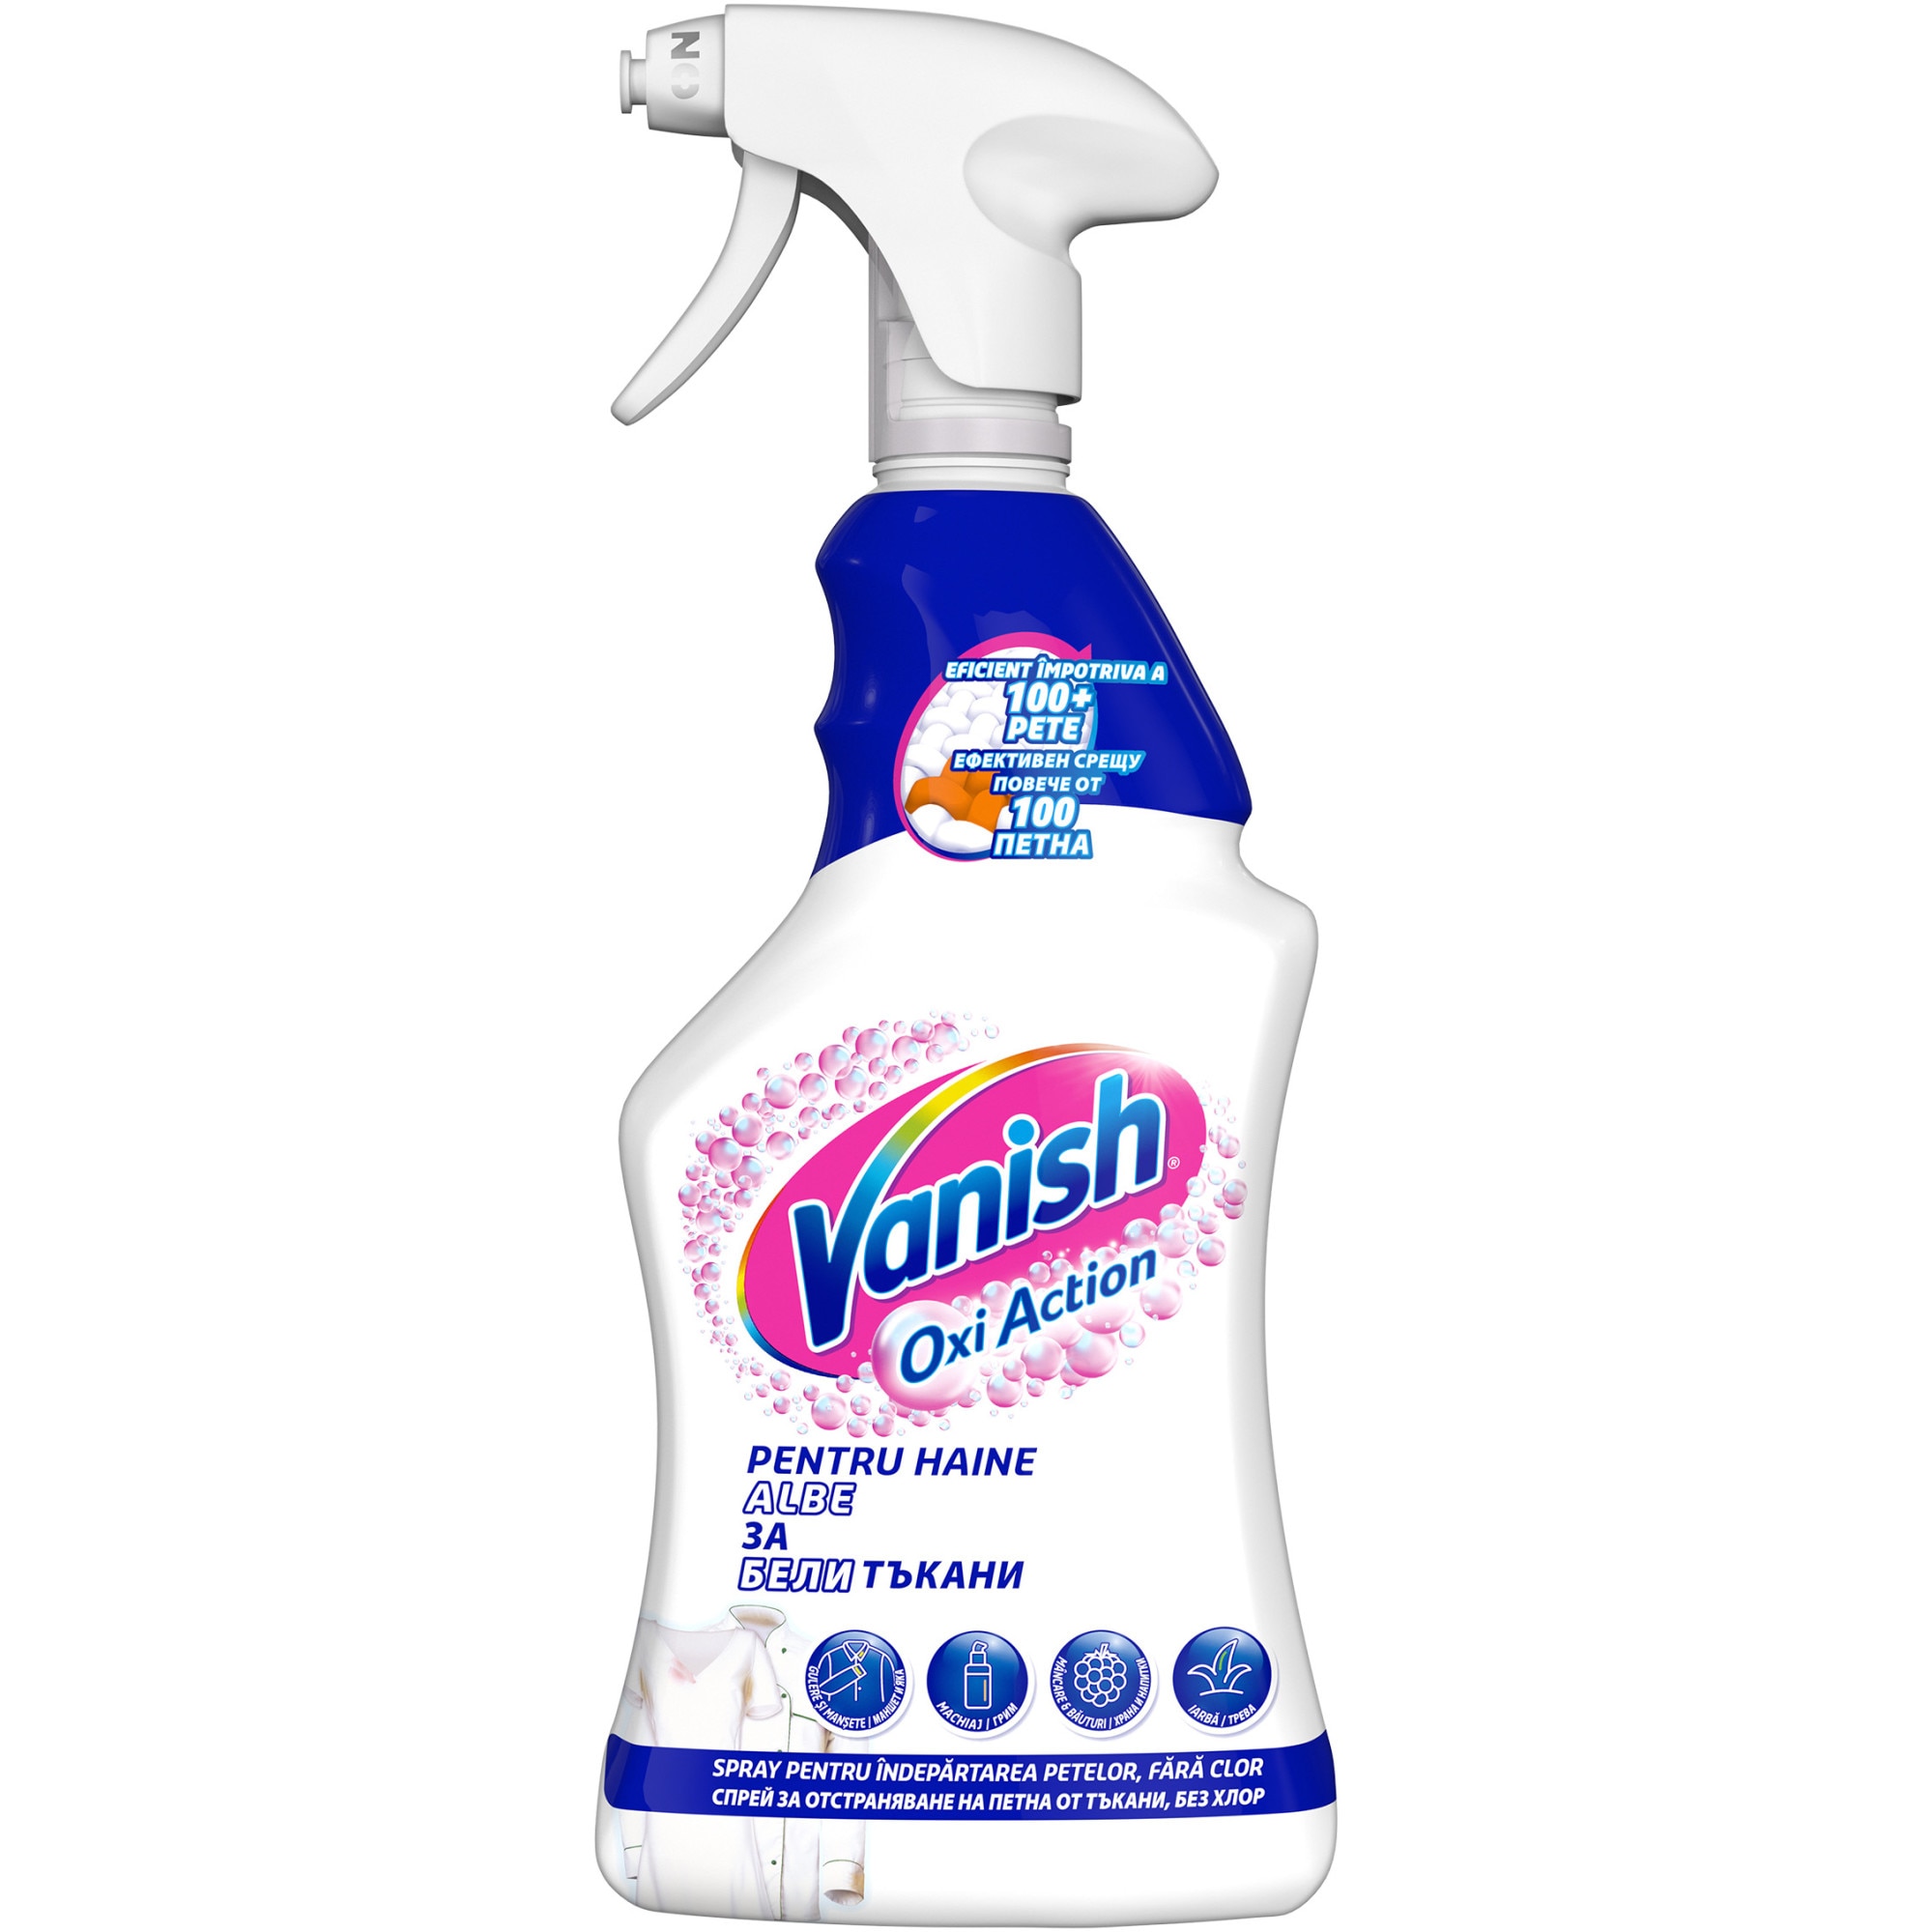 on a holiday Inconsistent What's wrong Spray pentru indepartarea petelor, fara clor, Vanish Oxi Action White  pentru haine albe, 500ml - eMAG.ro